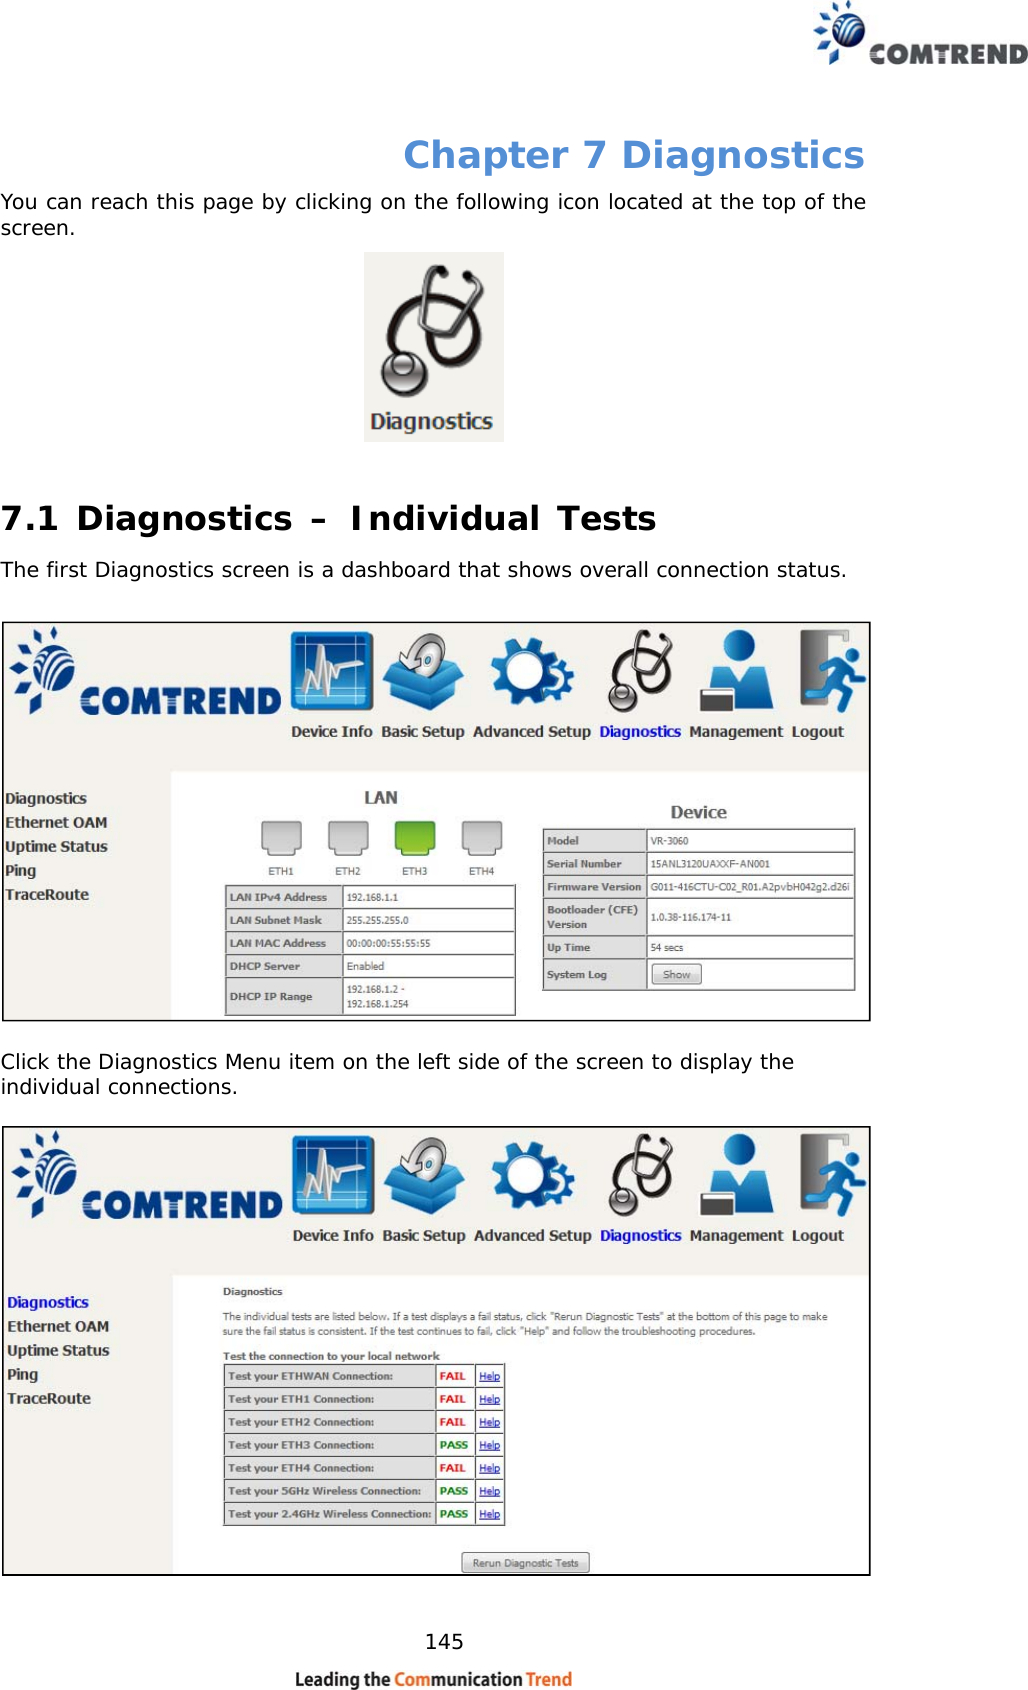    145 Chapter 7 Diagnostics You can reach this page by clicking on the following icon located at the top of the screen.  7.1 Diagnostics – Individual Tests The first Diagnostics screen is a dashboard that shows overall connection status.     Click the Diagnostics Menu item on the left side of the screen to display the individual connections.   